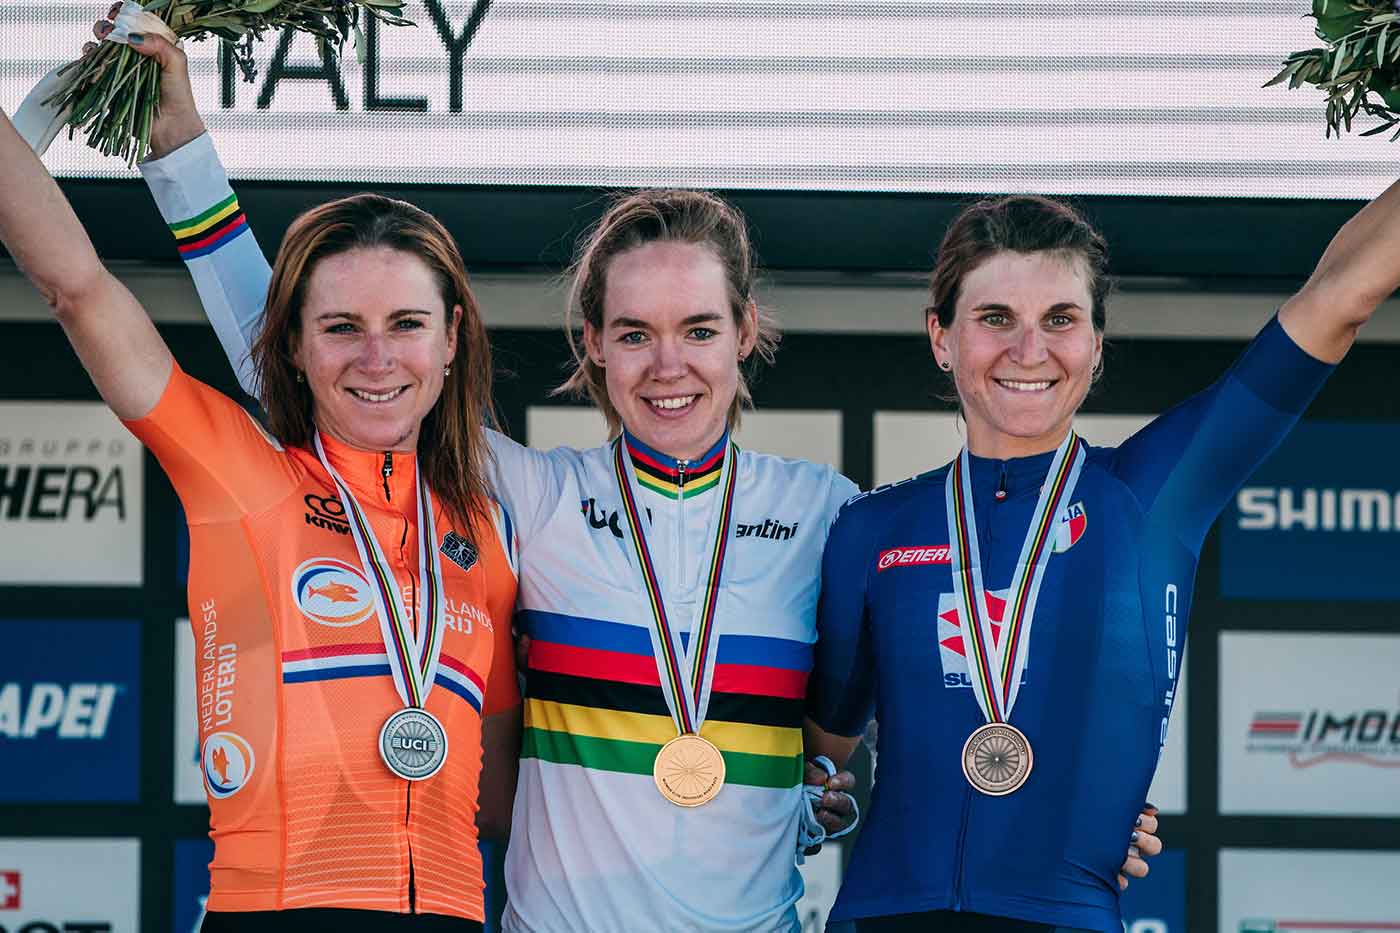 Women’s cycling is growing fast and new challenges are arising – Anna van der Breggen, interview part 2 - Johan Cruyff Institute